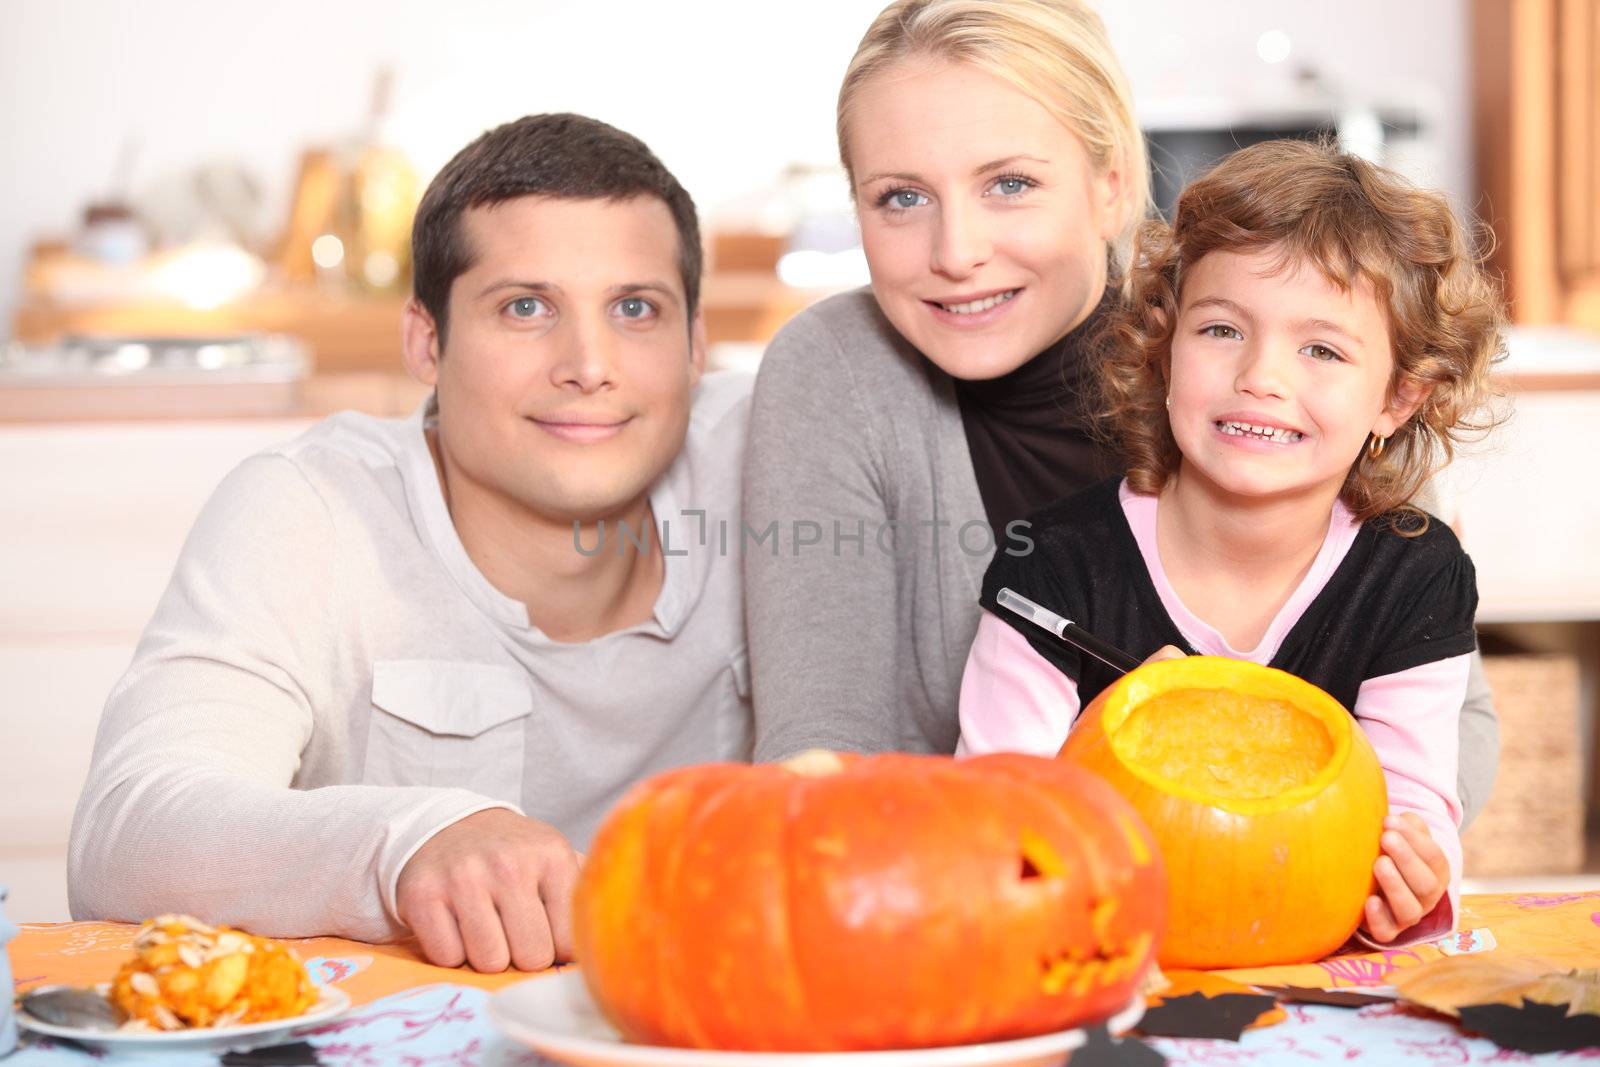 Family carving pumpkins together by phovoir